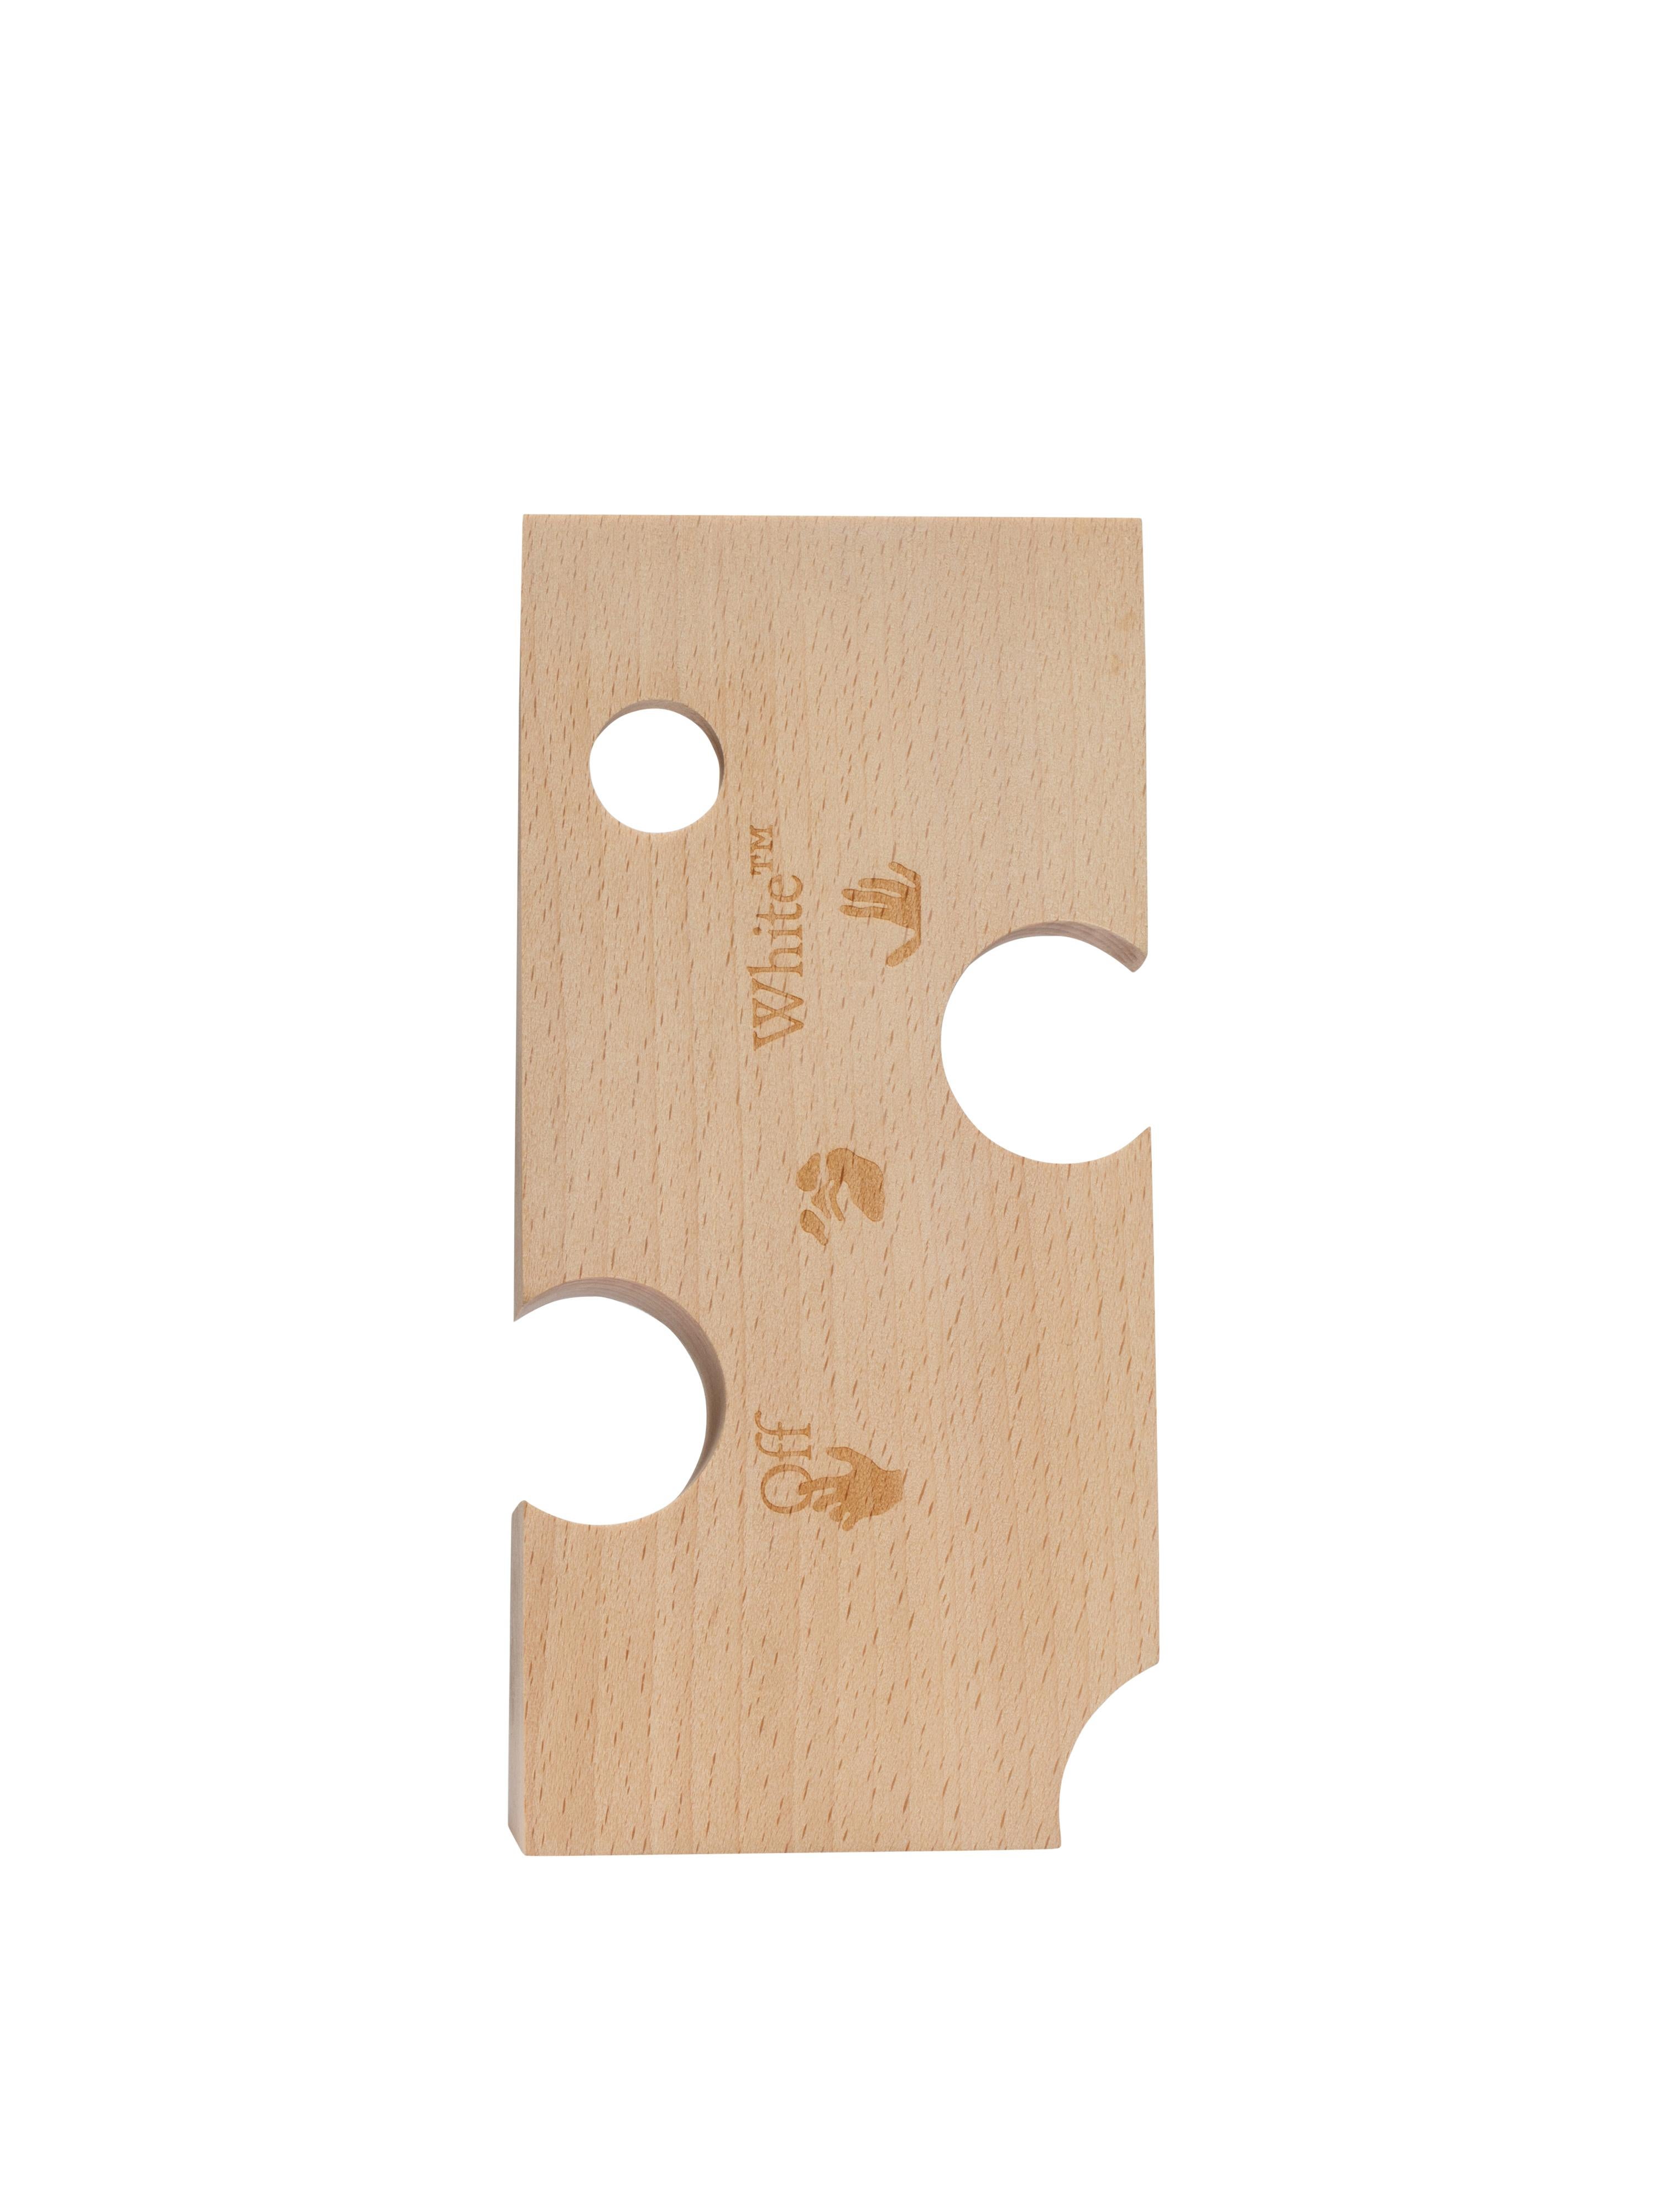 Holed wooden wedge - Swiss cheese shaped doorstopper with Man Swimming logo impressed - traditional doorstopper shape, holed and bigger than usual
By Virgil Abloh
Dimensions: 9 W x 19 D x 4.8 H
This item is only available to be purchased and